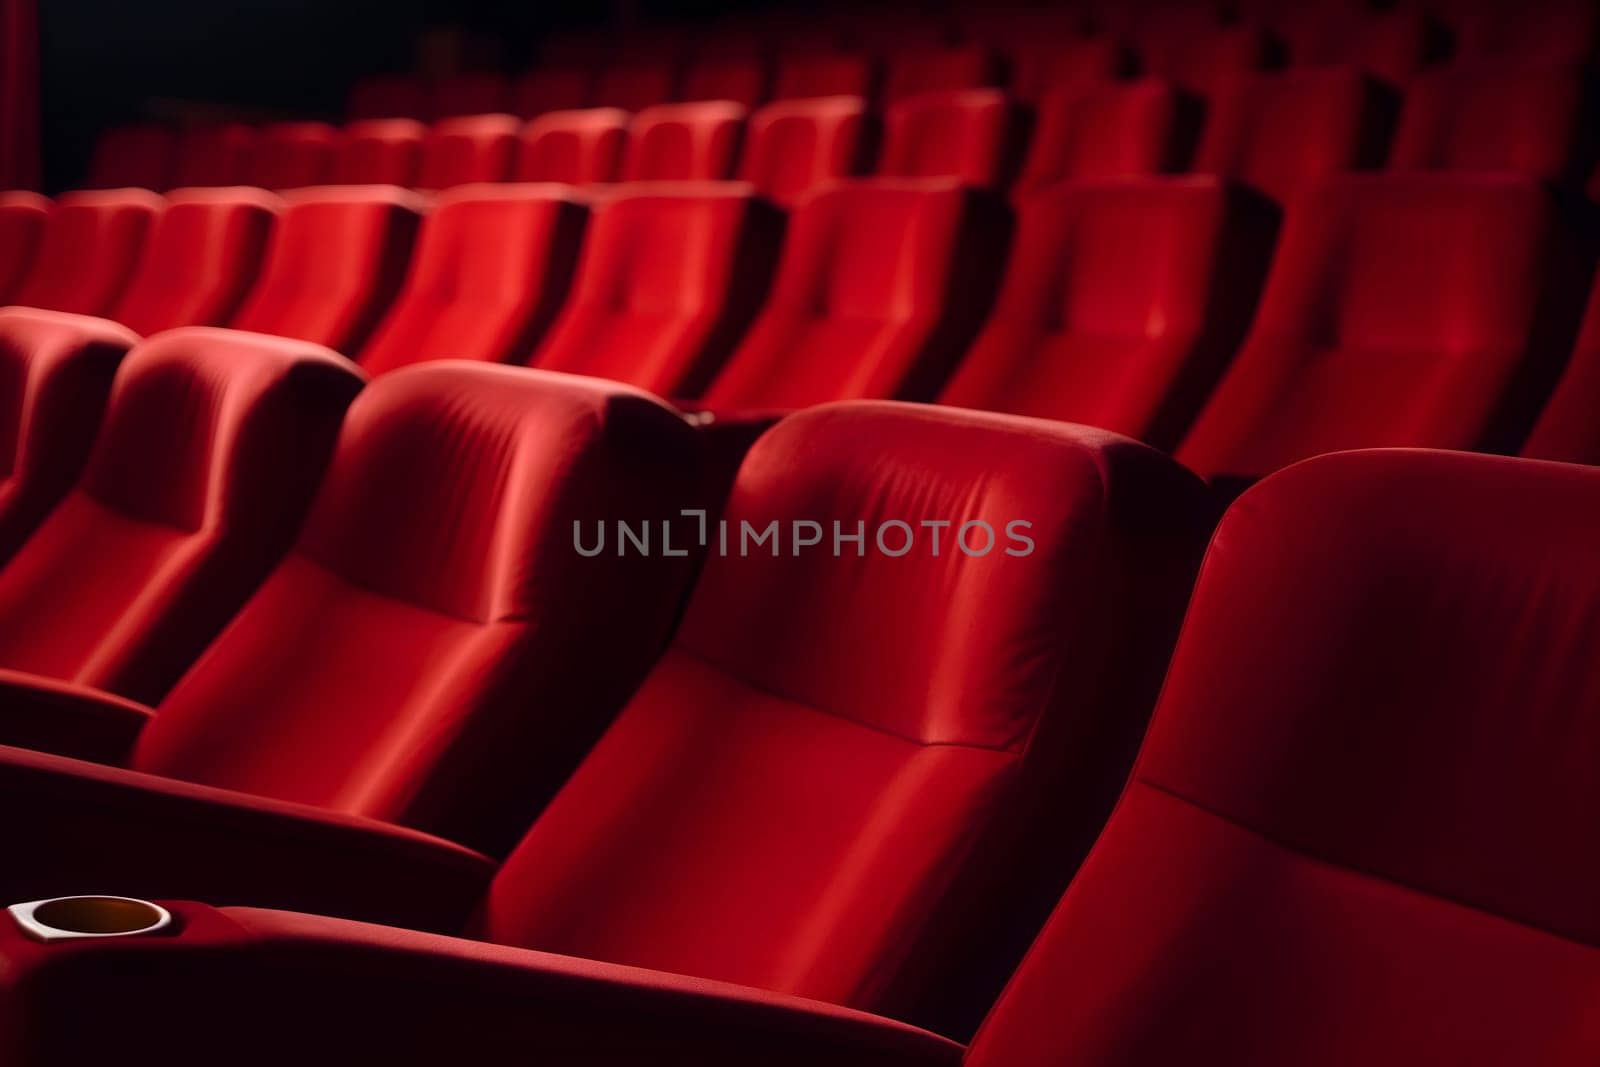 Empty red seats in cinema, domestic intimacy, zoom in, up close. Neural network generated in January 2024. Not based on any actual scene or pattern.